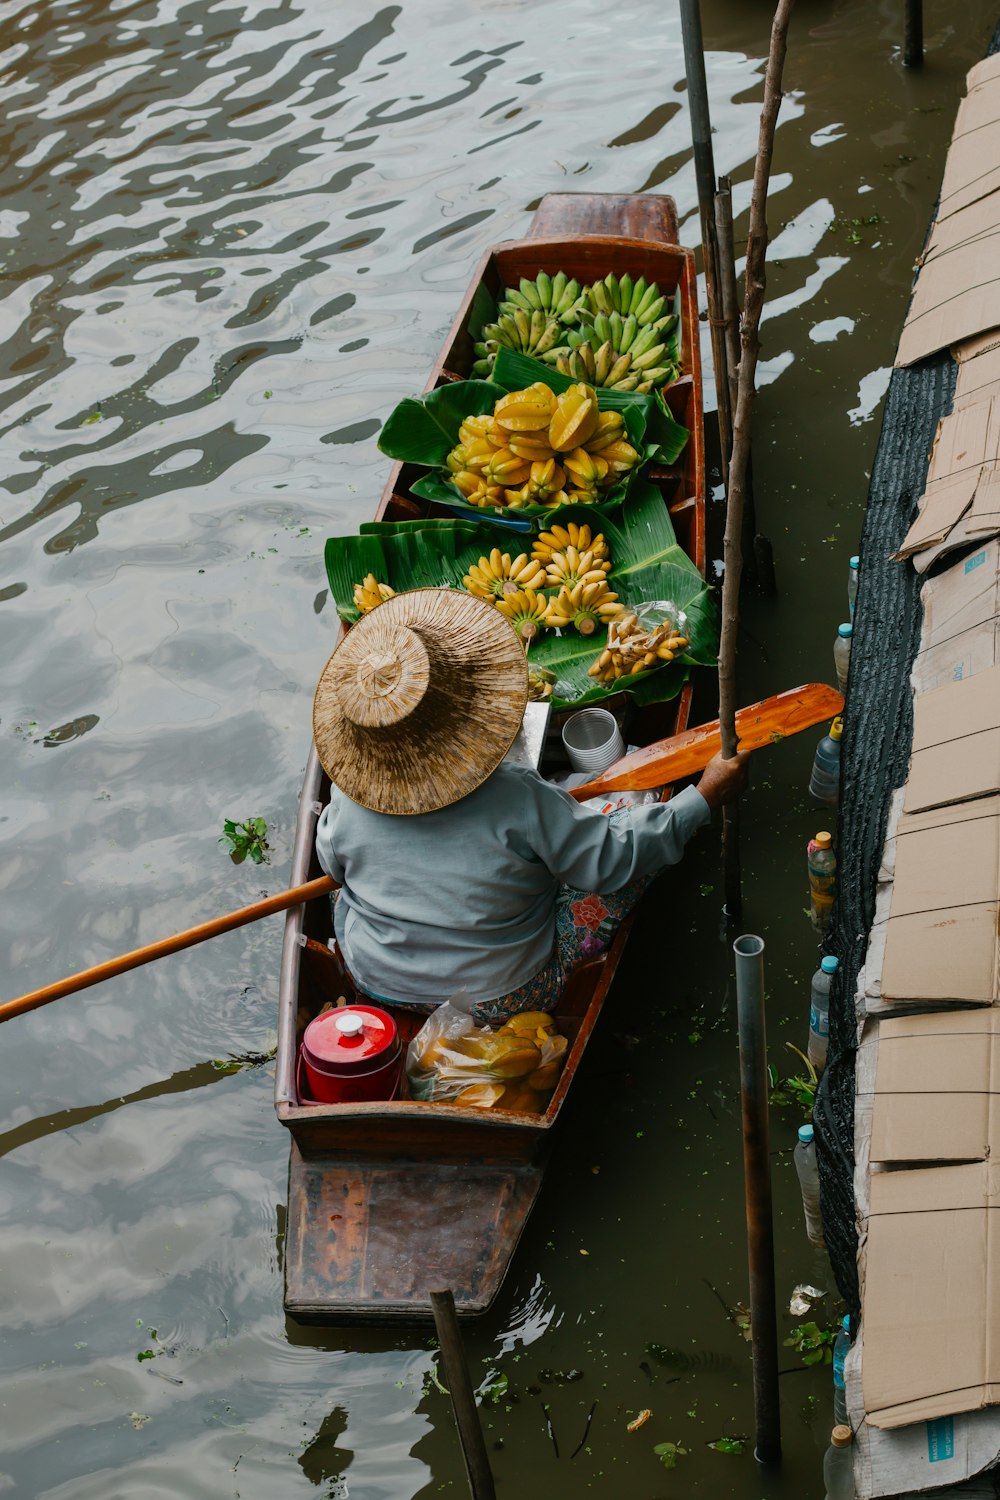 a person in a boat with bananas and other items